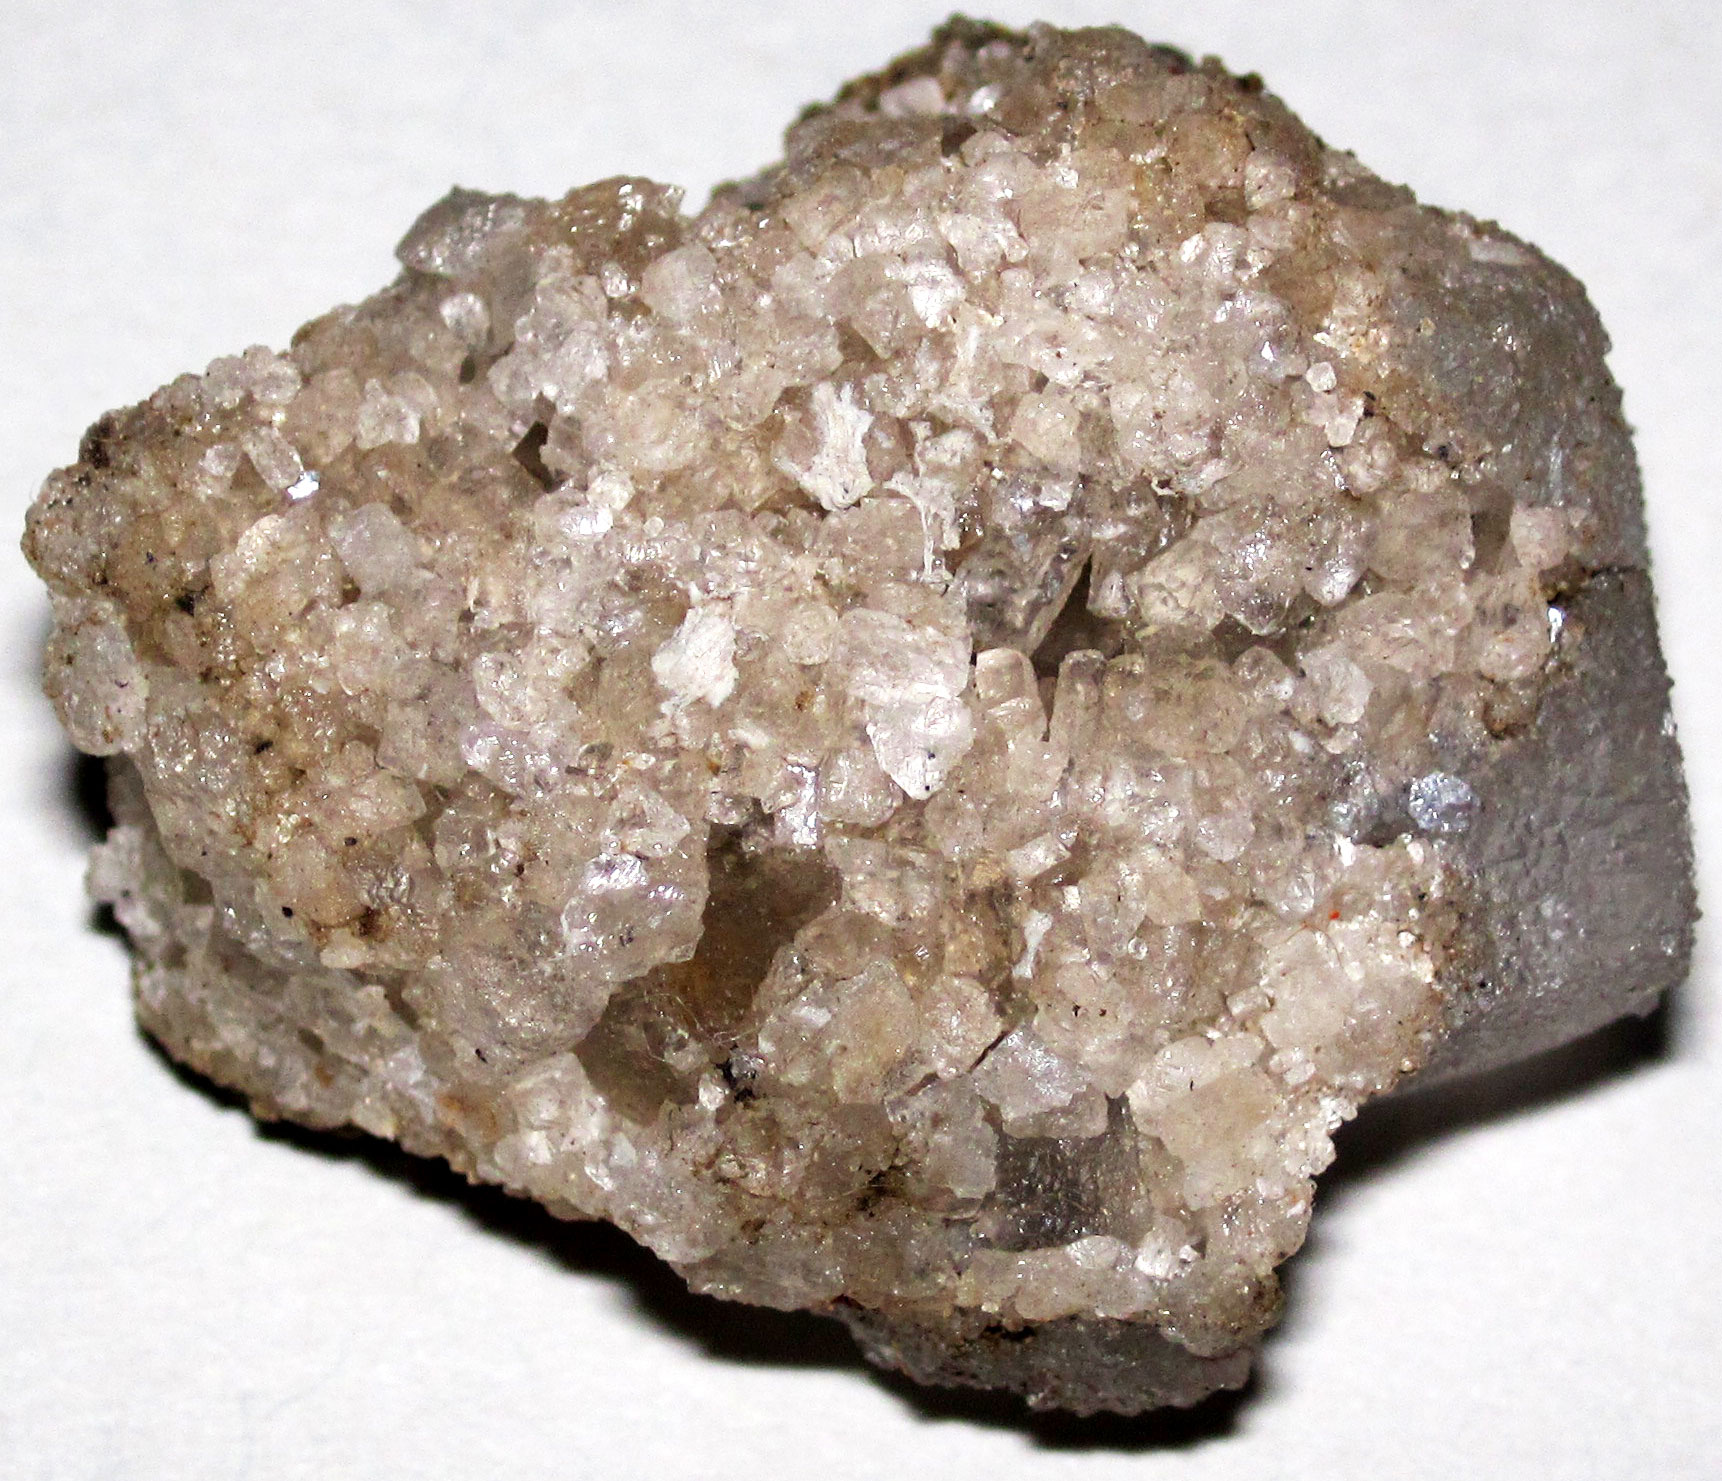 Photograph of Silurian rock salt from the Detroit Salt Company mine in Michigan. The photo shows a grayish rock covered with large yellowish to white crystals on its upper surface. 